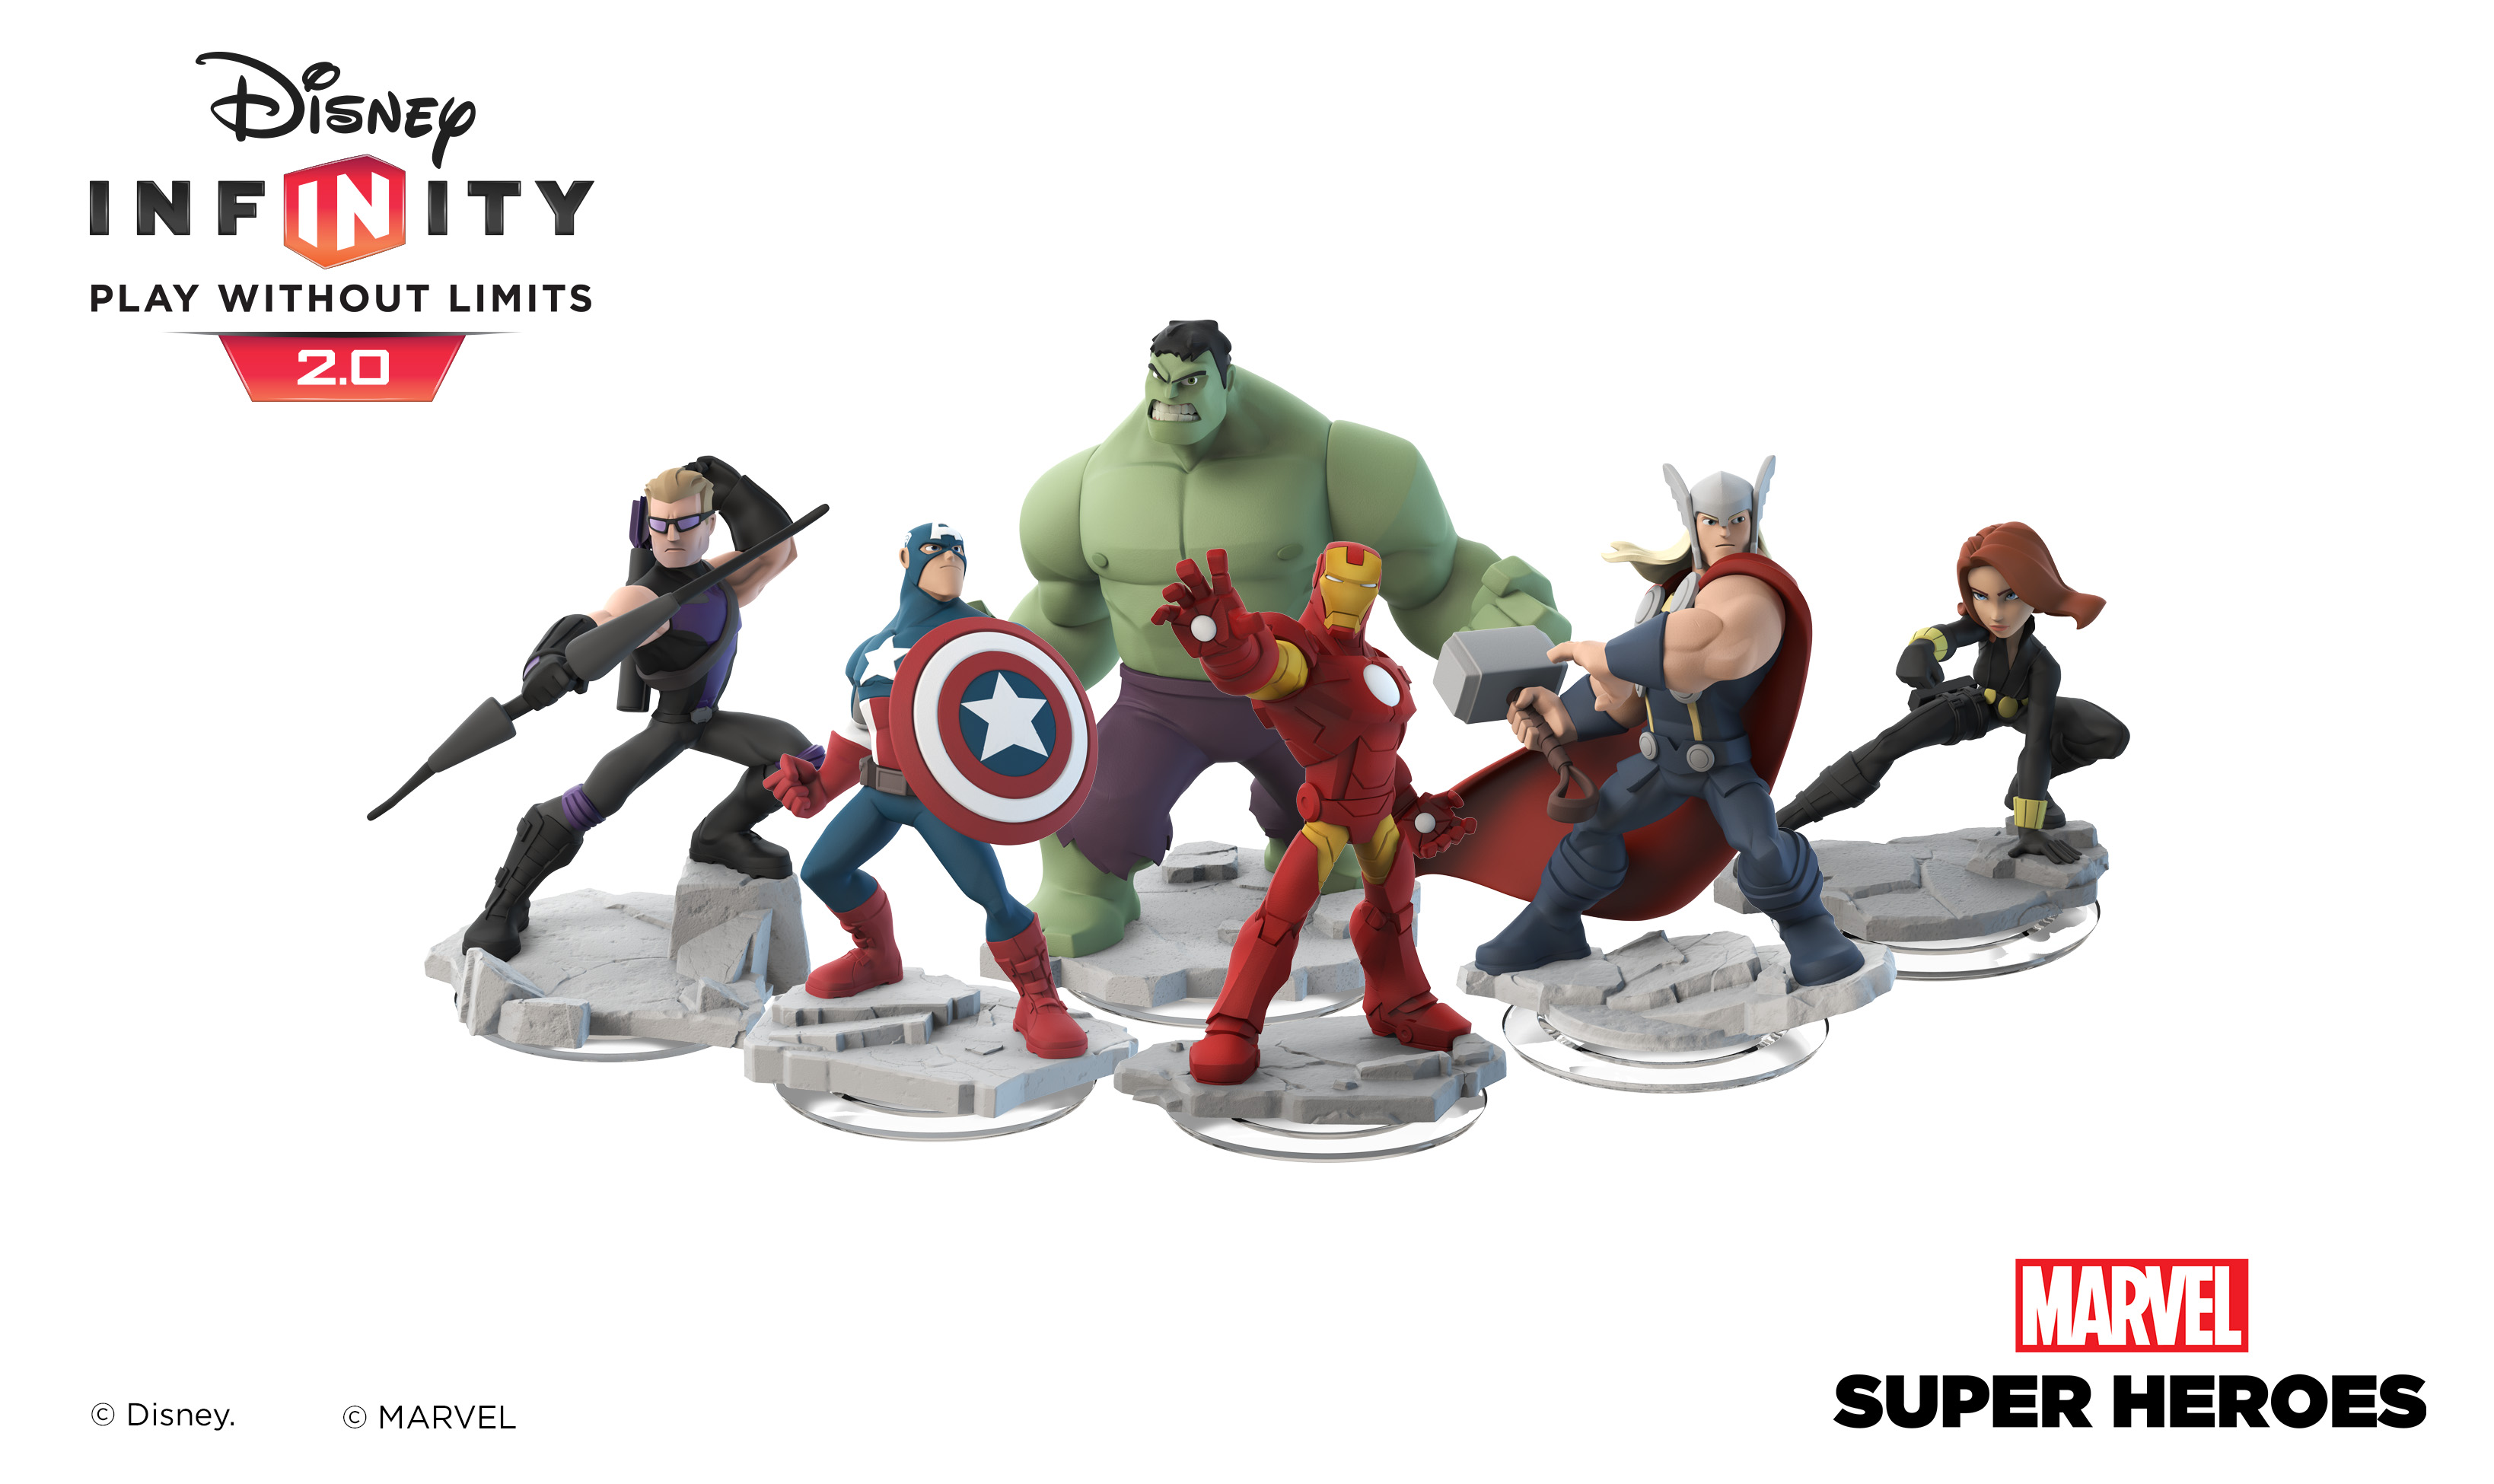 Amazing Disney Infinity Pictures & Backgrounds